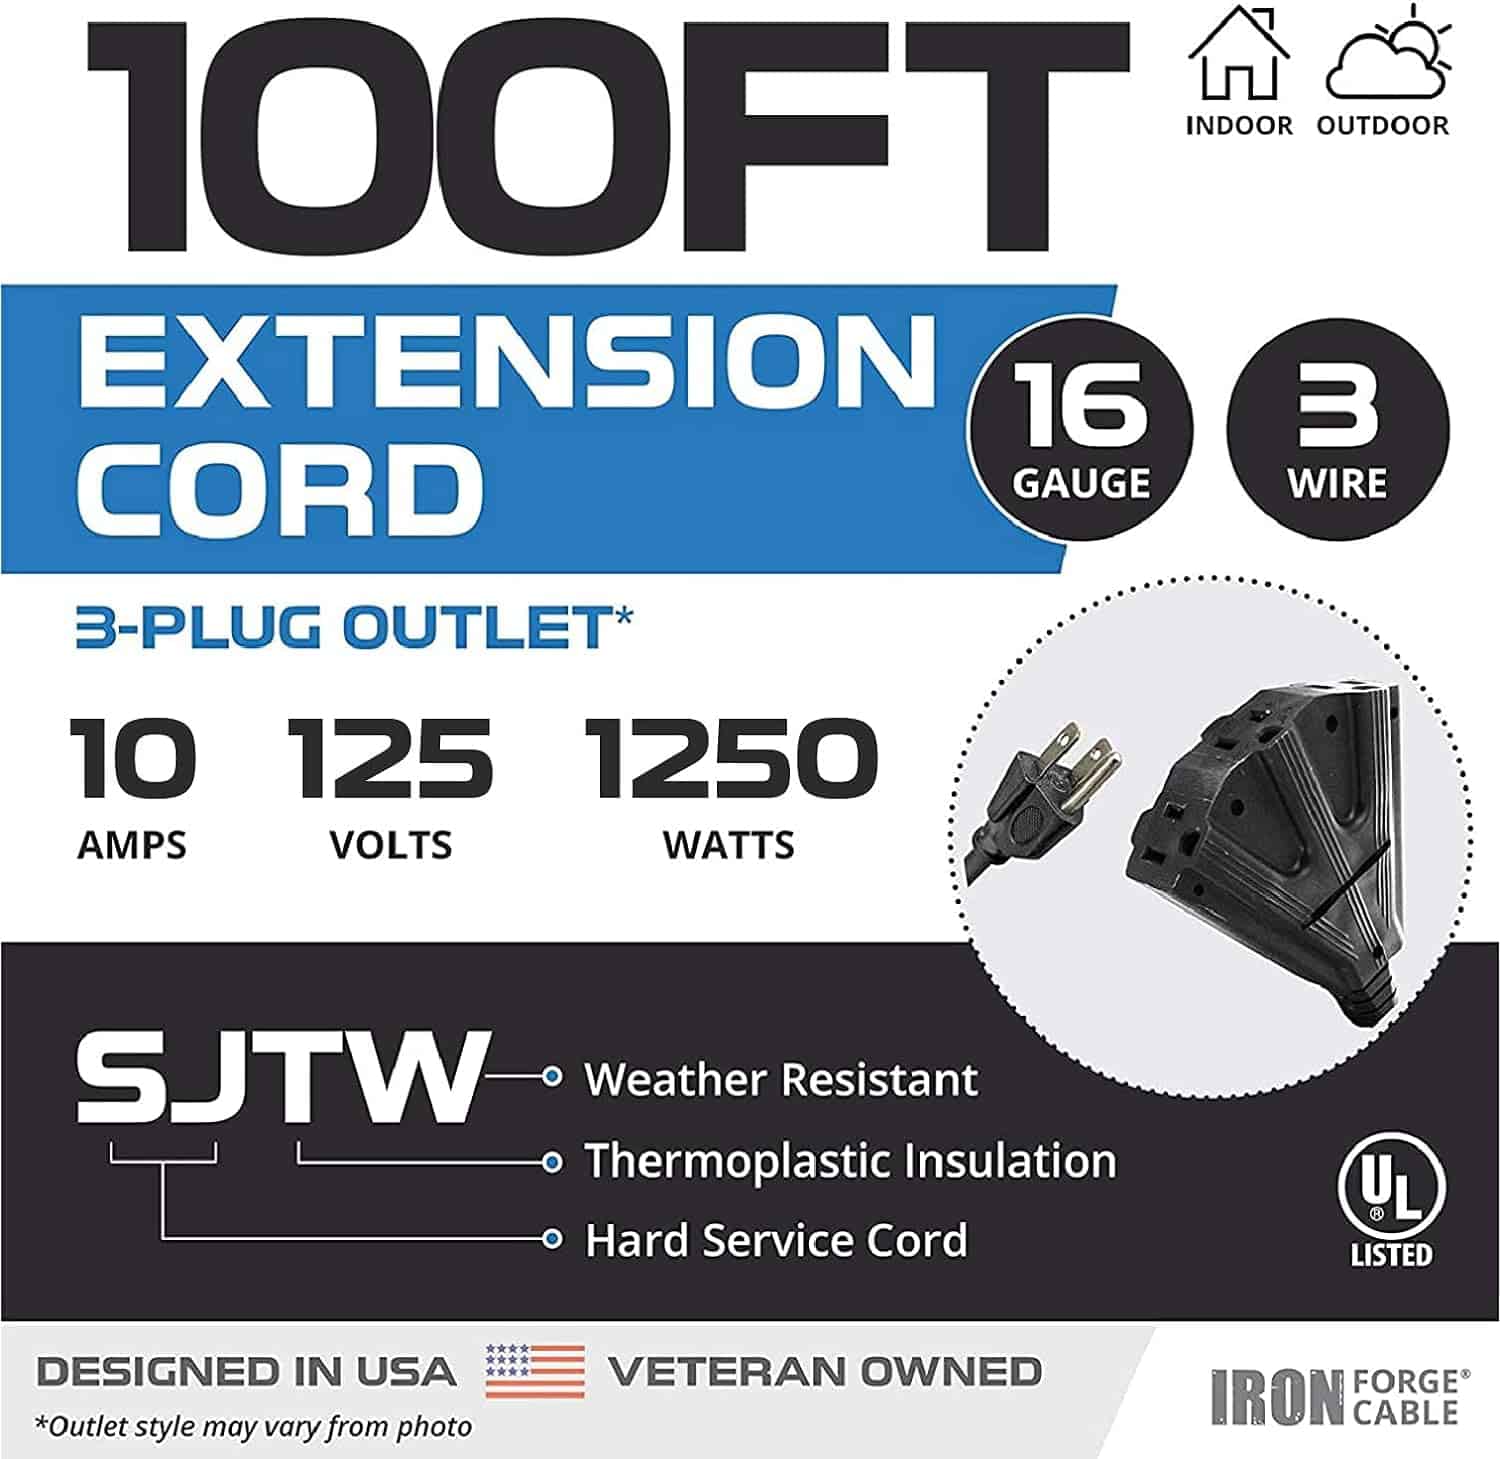 Iron-Forge-Cable-100ft-Extension-Cord-with-3-Outlet-16-3-Weatherproof-100-ft-Black-Extension-Cord-with-Multiple-Outlets-3-Prong-for-Landscaping-Lawn